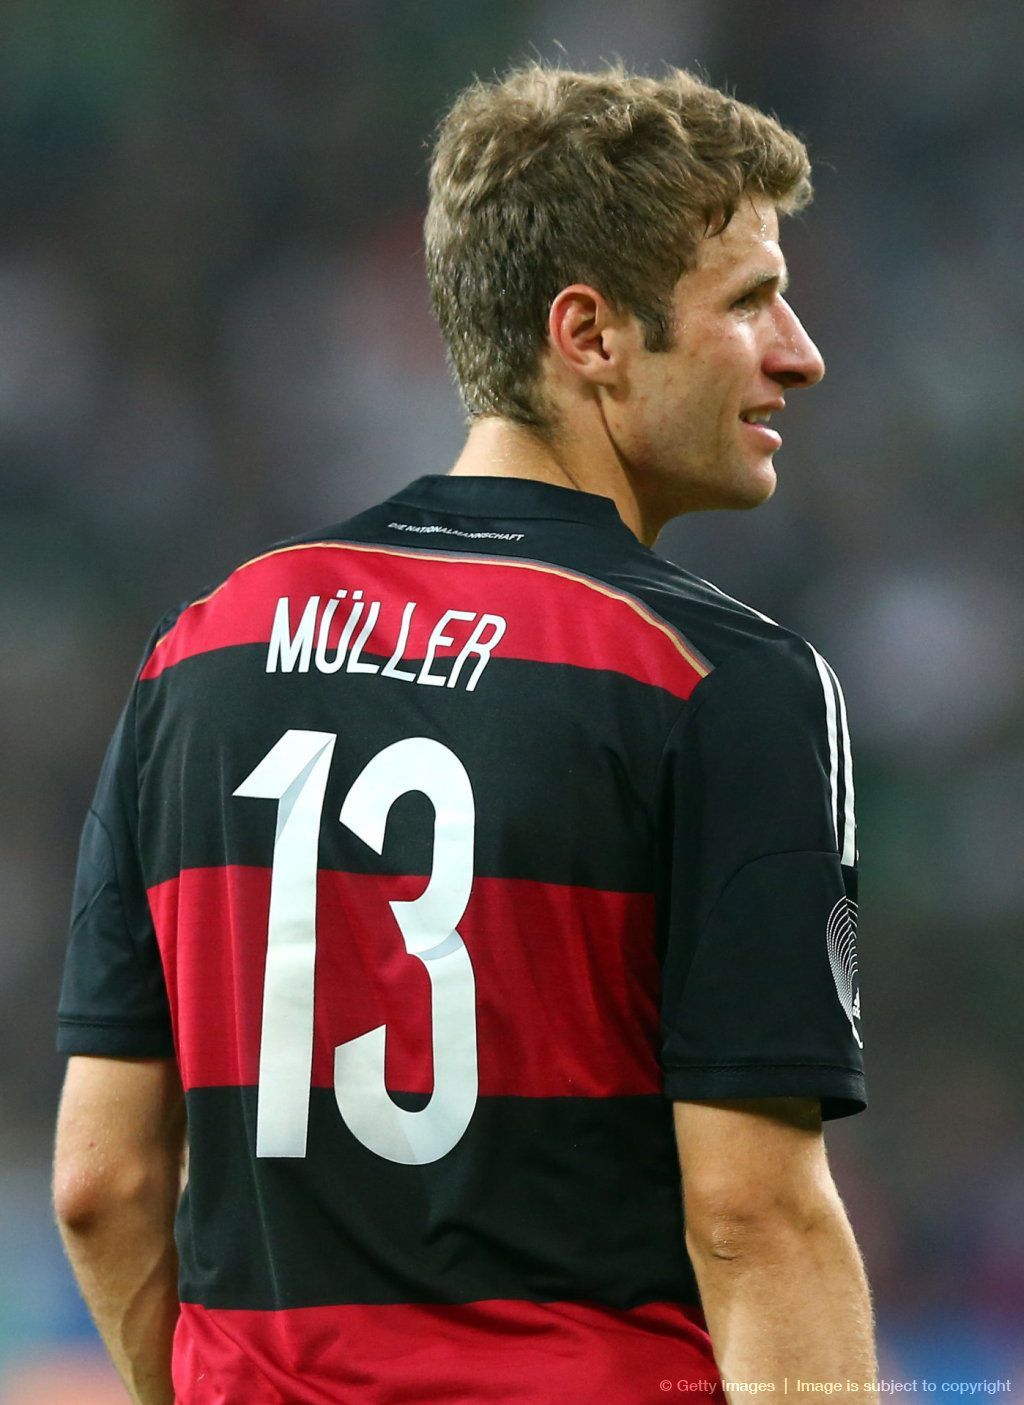 Full name: Thomas Müller Date of birth: 13 September 1989 (age 24) Place of birth: Weilhe. Germany national football team, Soccer players haircuts, Thomas muller